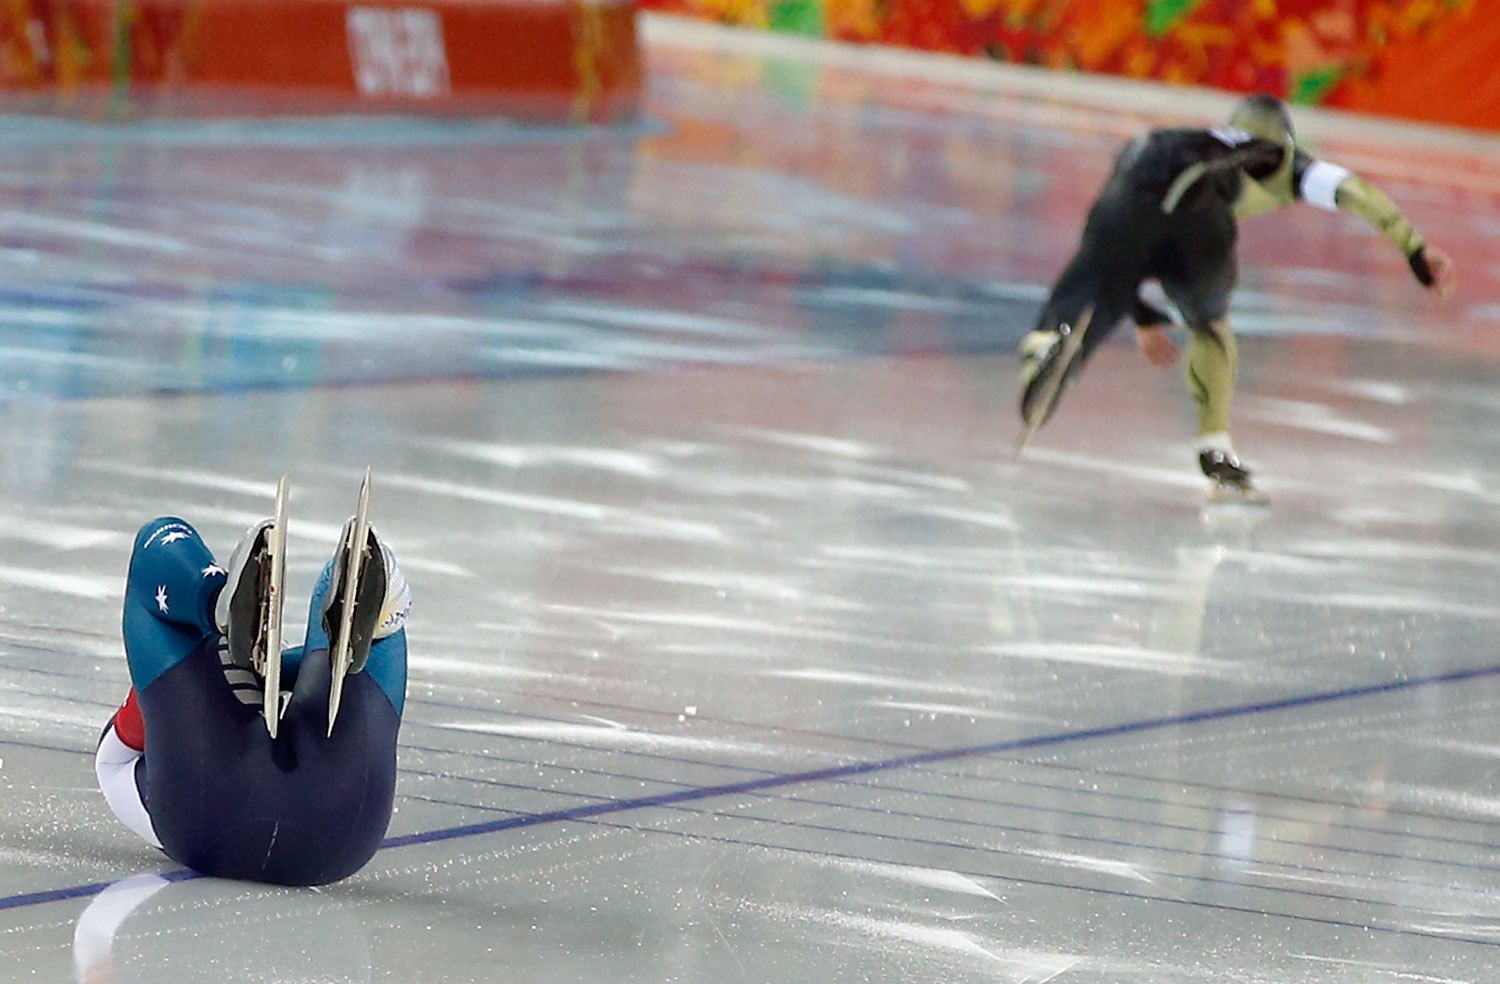 Australia's Daniel Greig, left, crashes in the first heat of his men's 500-meter speedskating race against Yuya Oikawa of Japan at the Adler Arena Skating Center at the 2014 Winter Olympics, Feb. 10, 2014, in Sochi.